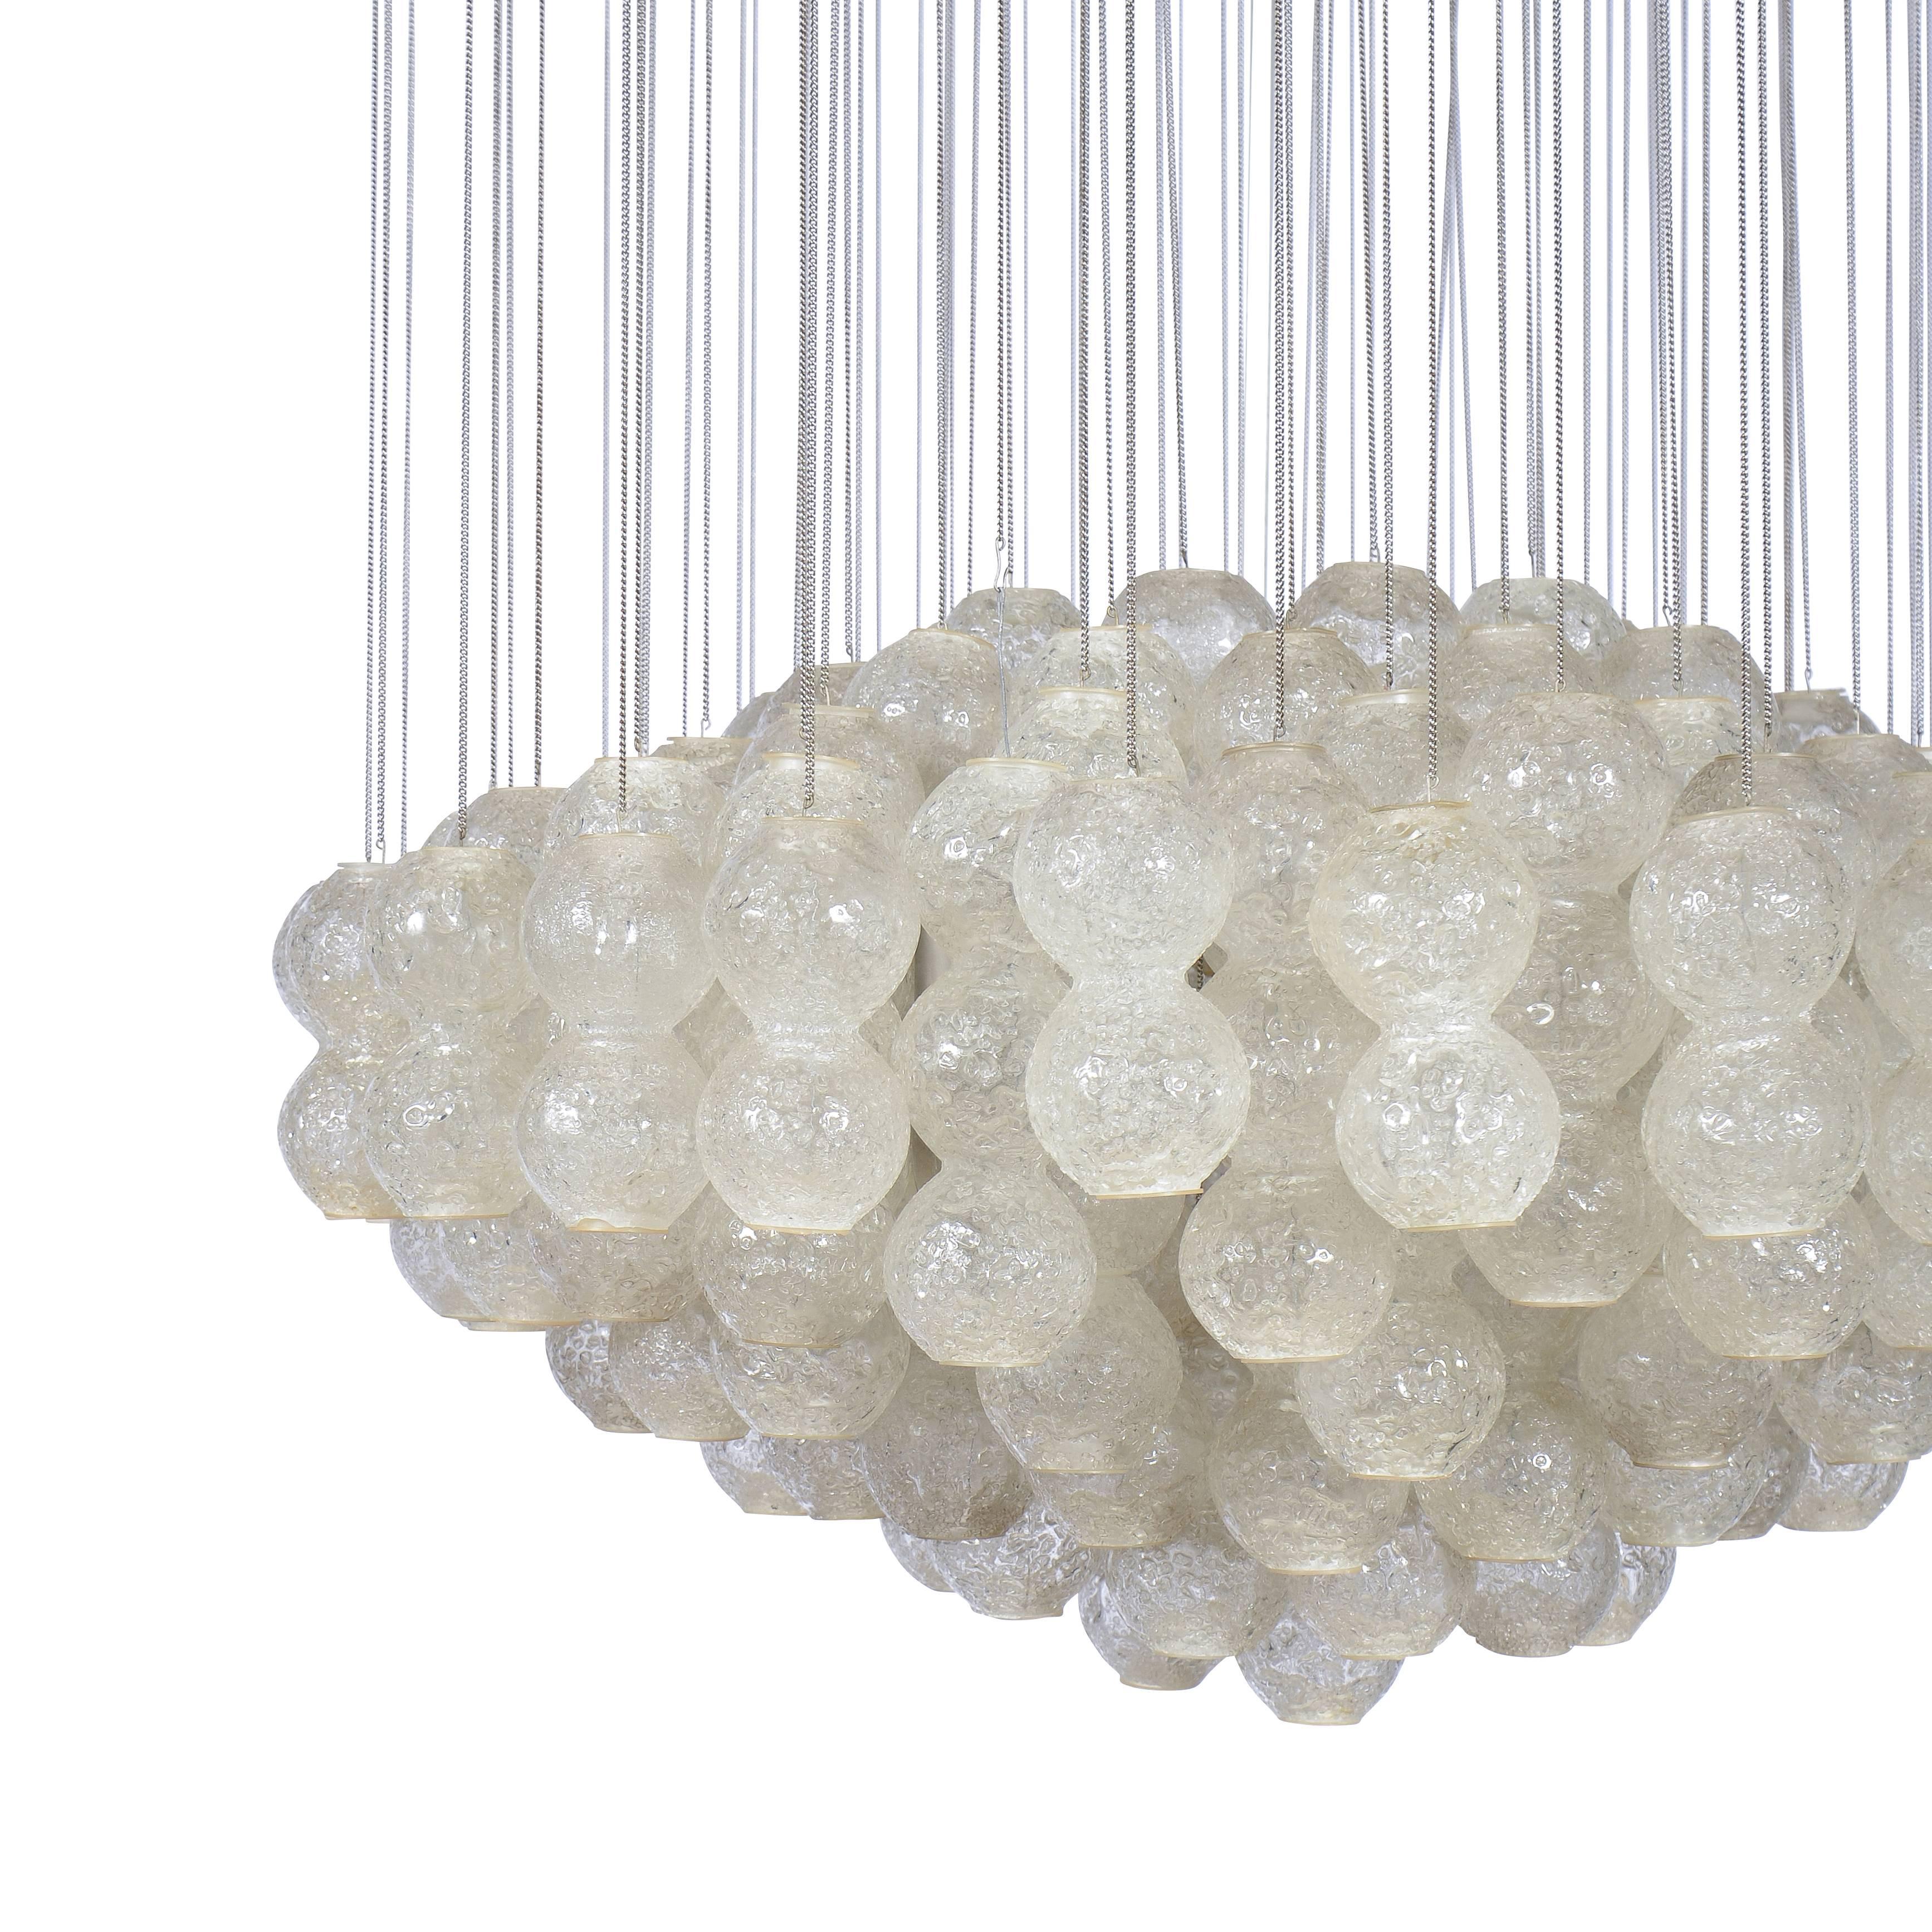 Sculpted star shade chandelier with chained hanging glass clusters.